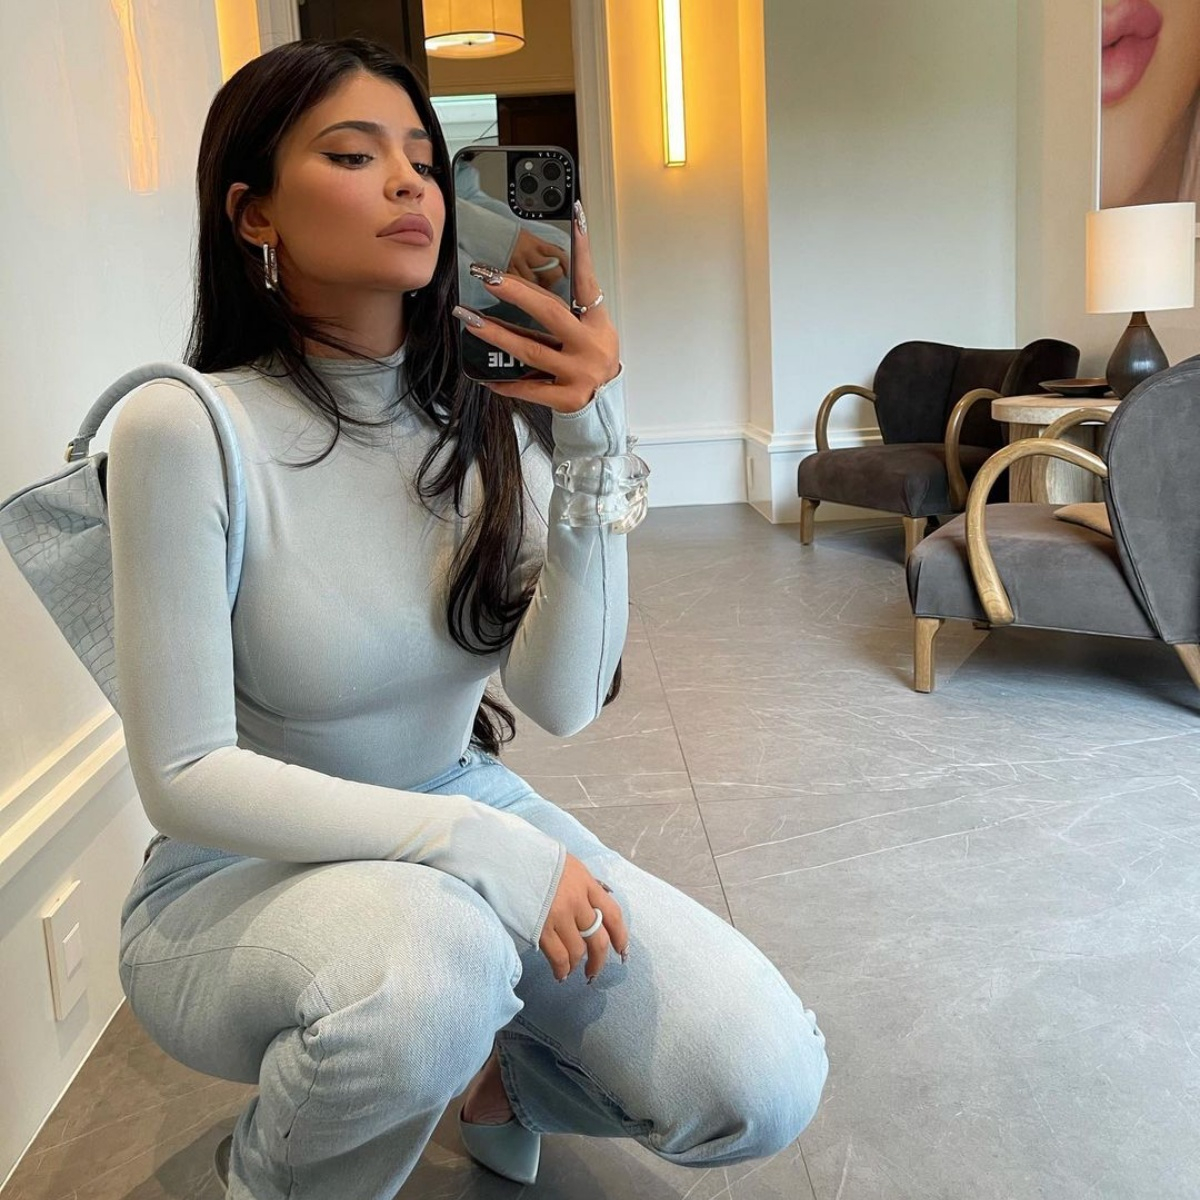 Kylie Jenner's Surprise Photo Dump May Include Her Wildest Look Yet